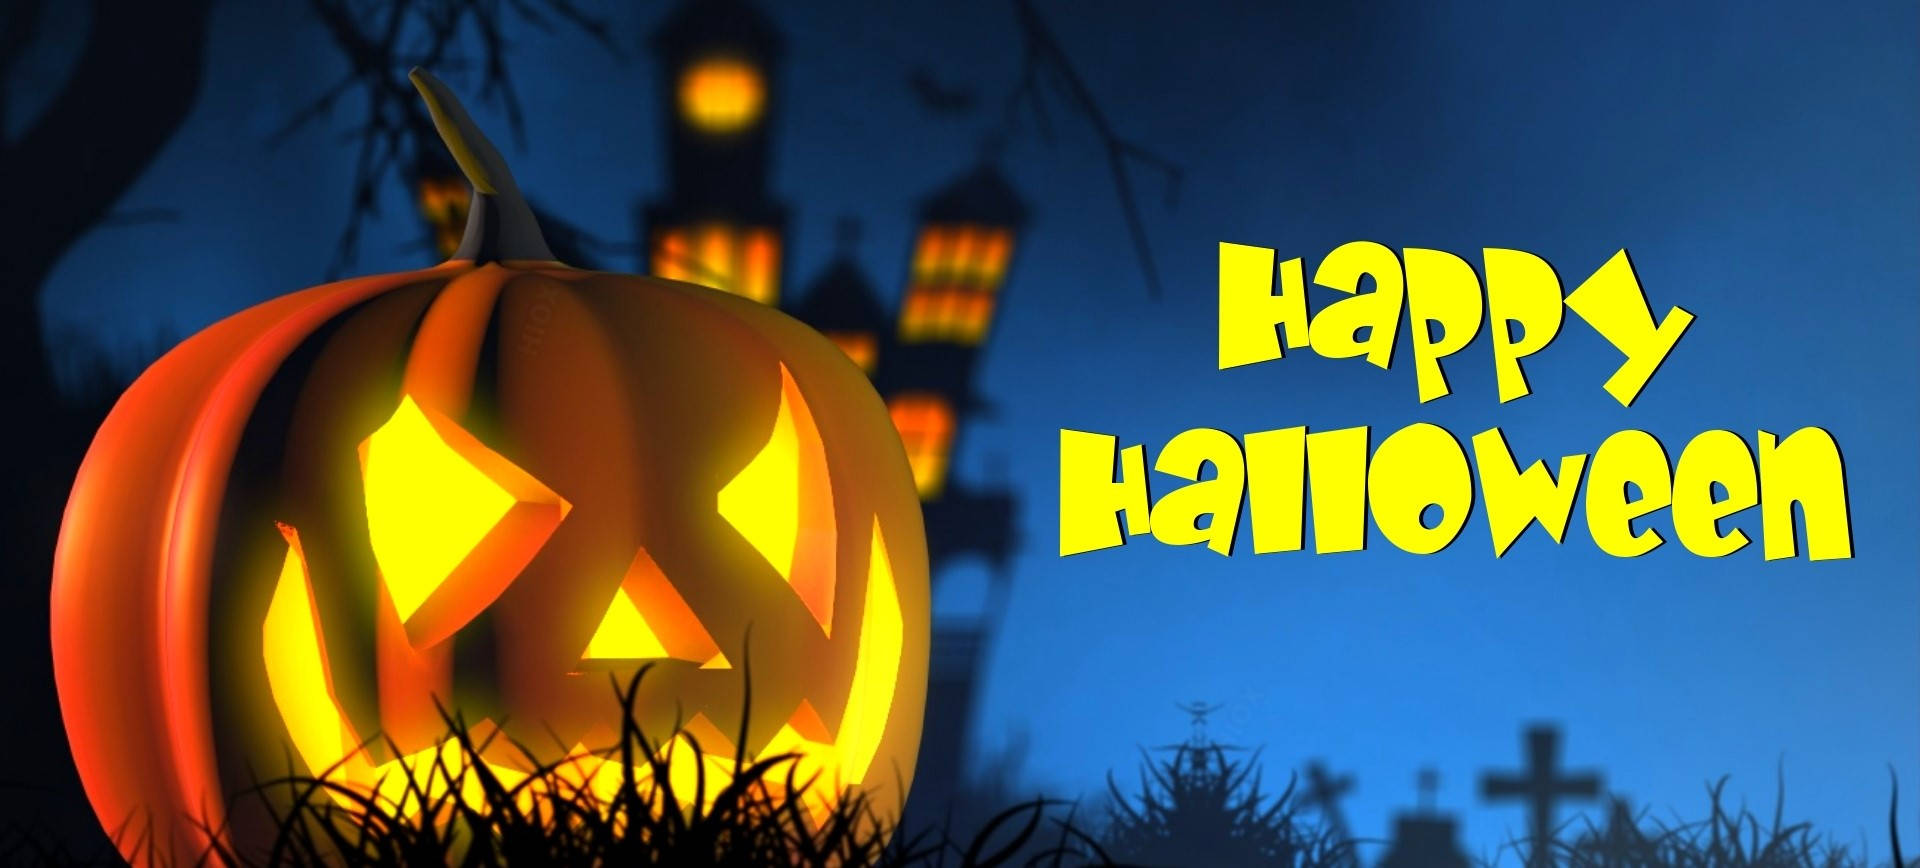 Have a Happy and Safe Halloween! Wallpaper